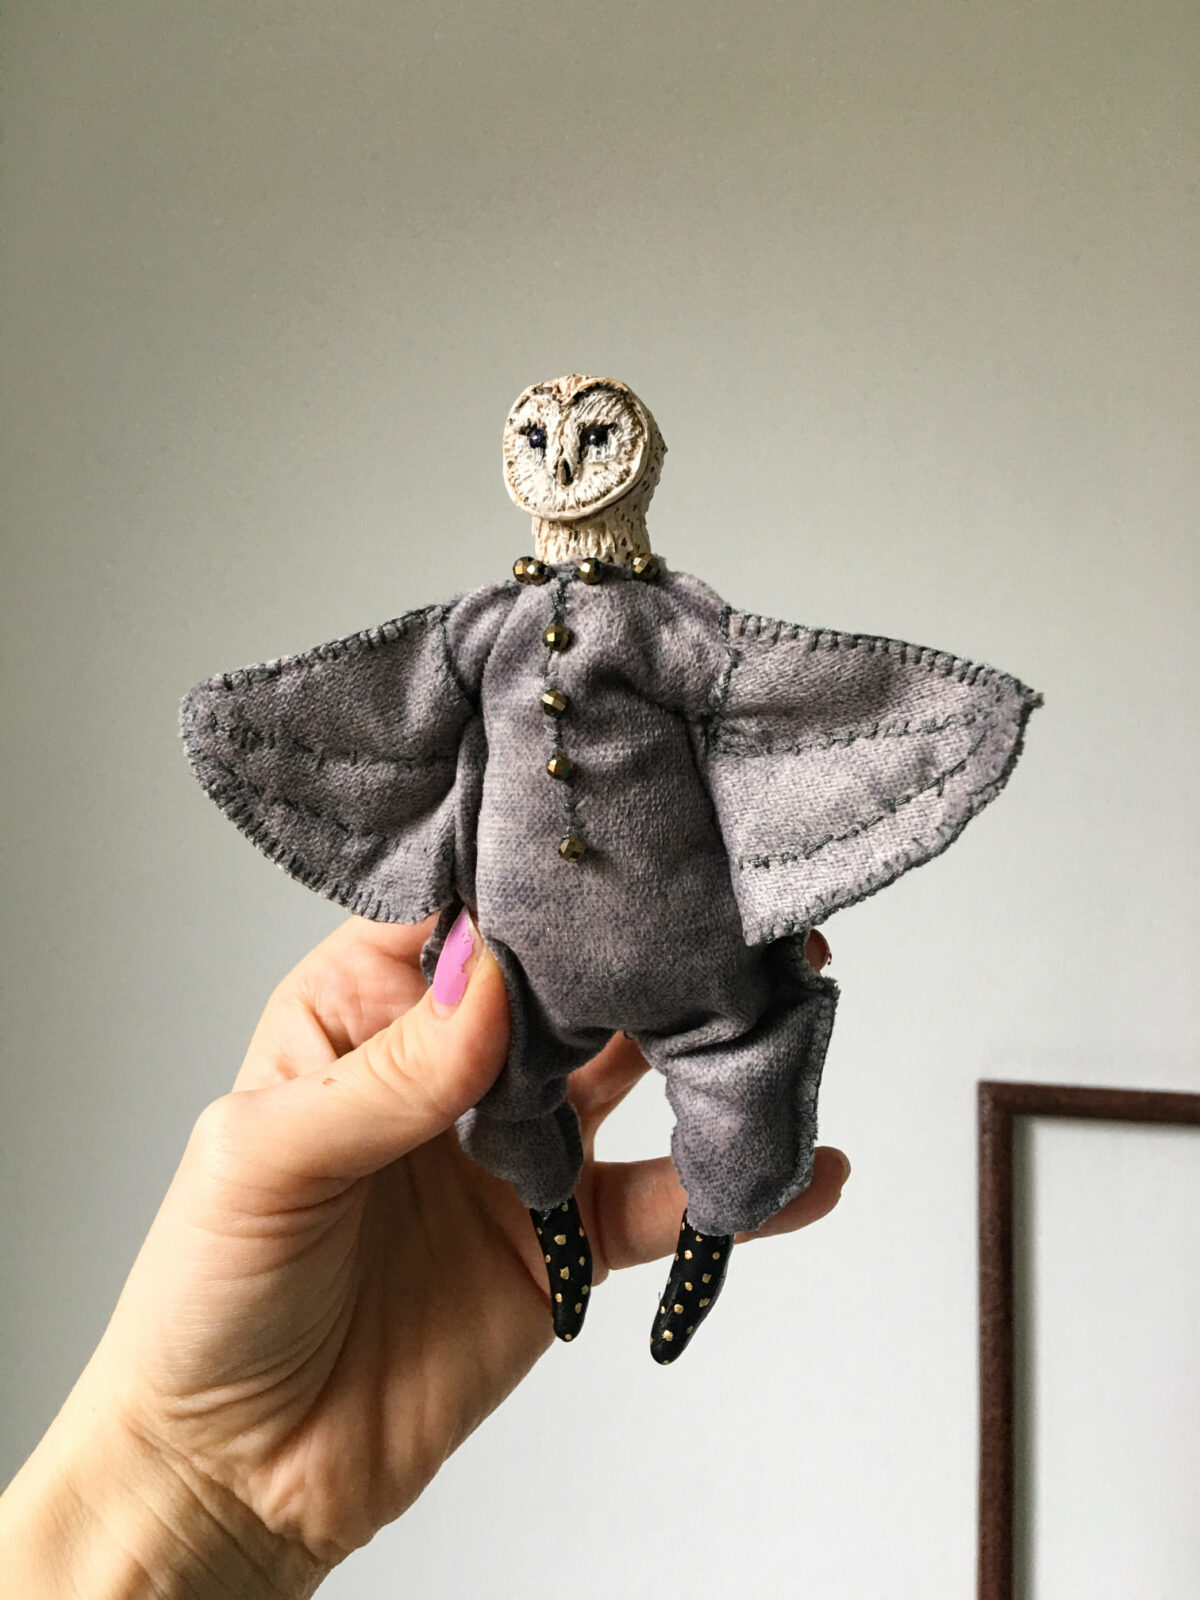 Whimsical Art Dolls And Paintings Of Magical Beings By Agata Glowacka Khloponina 2